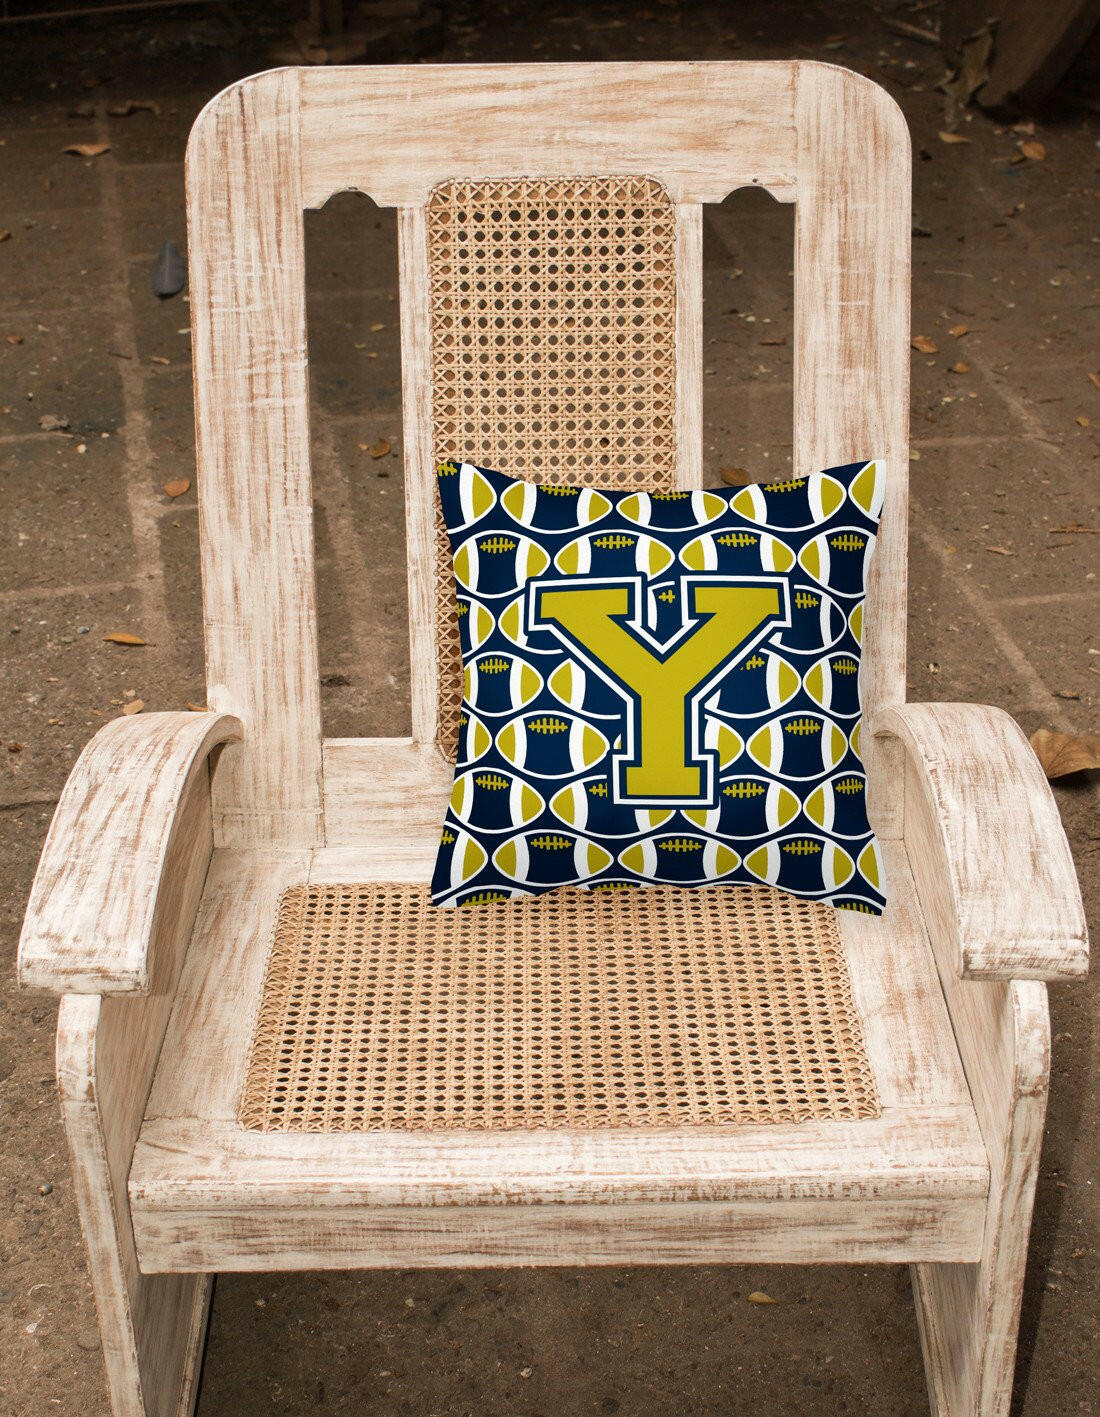 Letter Y Football Blue and Gold Fabric Decorative Pillow CJ1074-YPW1414 by Caroline's Treasures